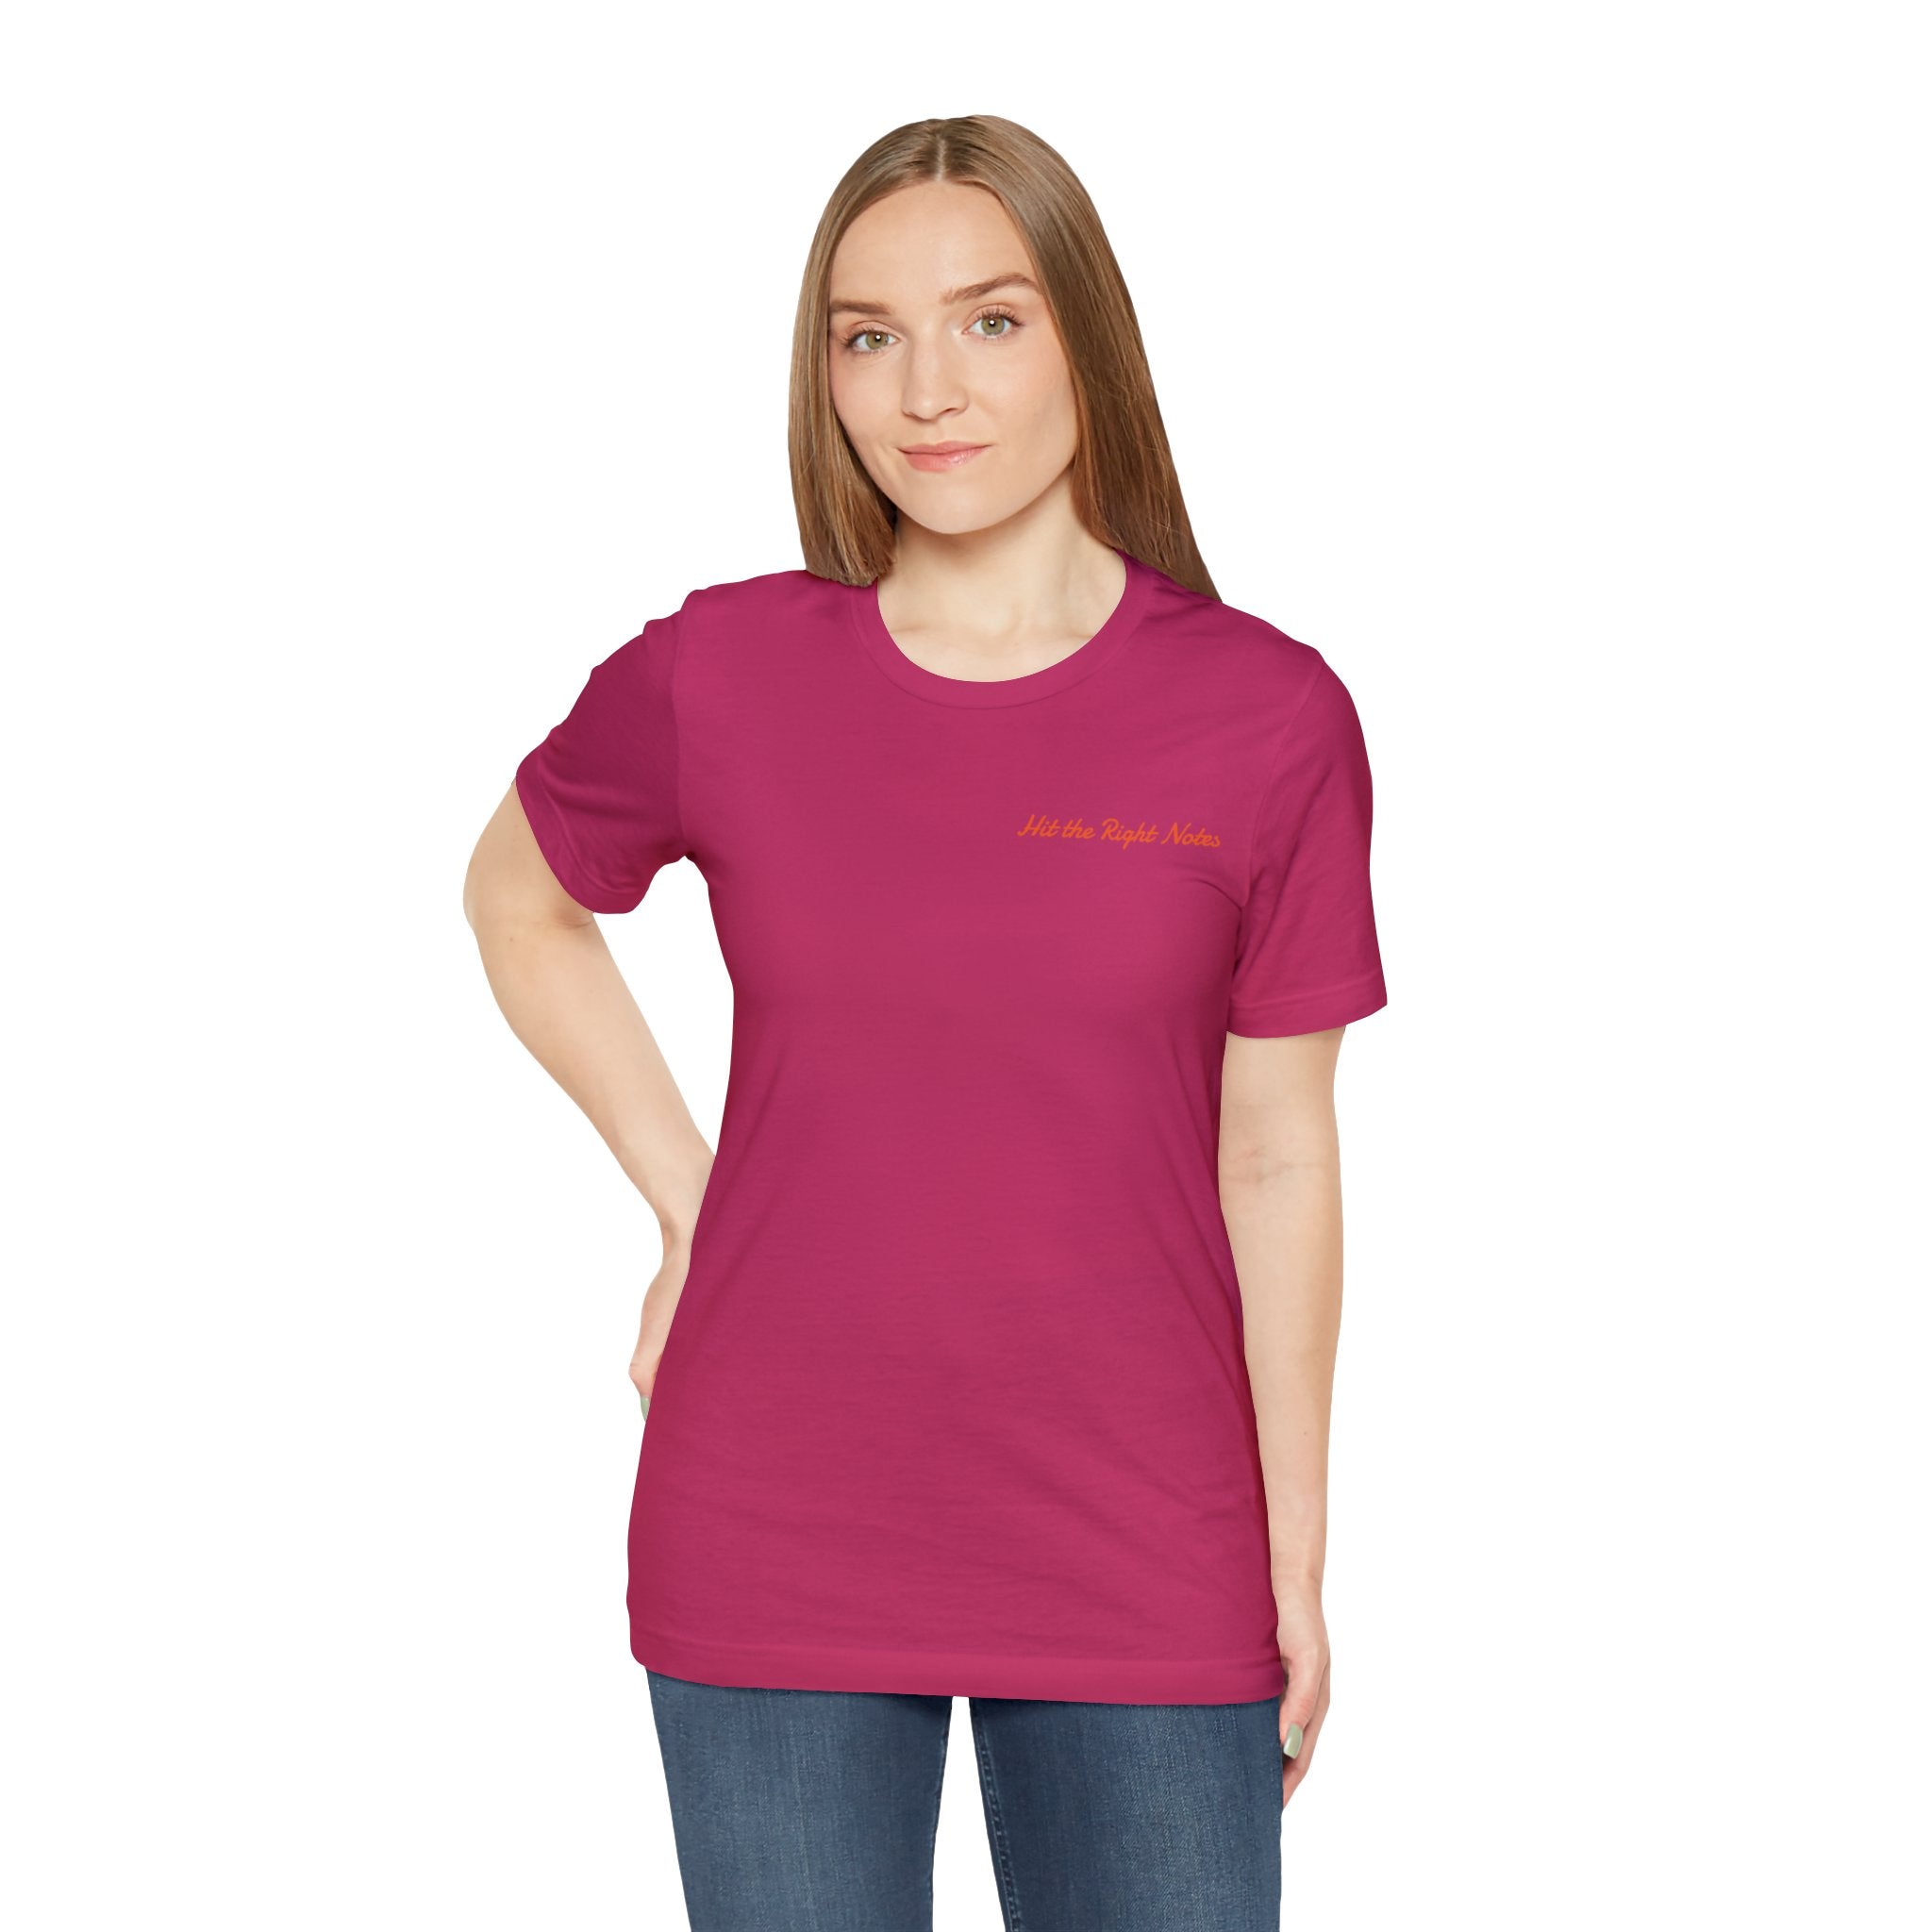 Hit the Right Notes Jersey Tee - Bella+Canvas 3001 Heather Mauve Classic Tee Comfortable Tee Cotton T-Shirt Graphic Tee JerseyTee Statement Shirt T-shirt Tee Unisex Apparel T-Shirt 4718896914592945824_2048 Printify